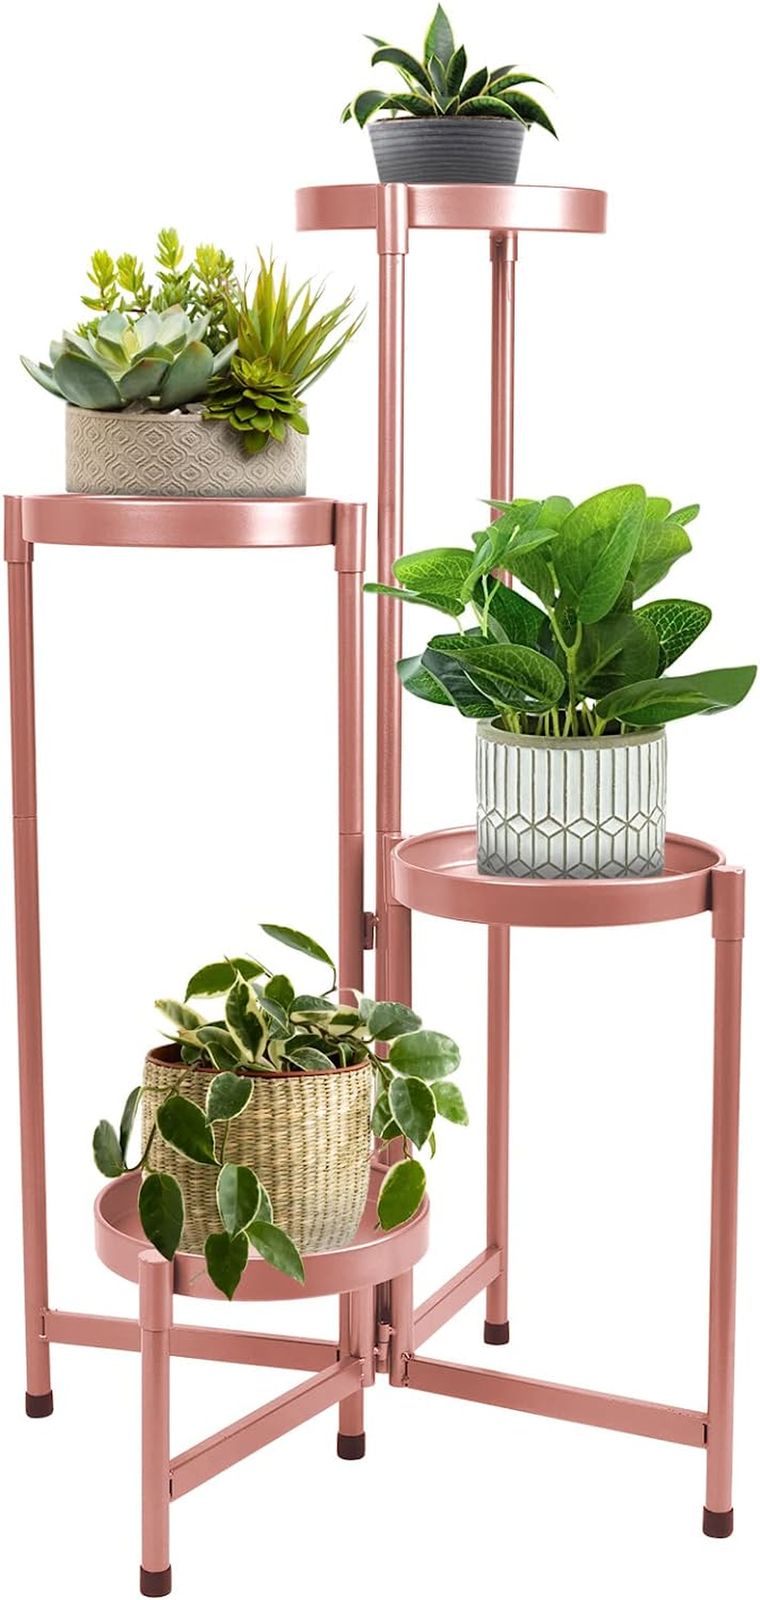 4 Tier Plant Stand Indoor Outdoor, 31 Inch Tall Metal Plant Shelf  Waterproof, Pl 744110503296 | Ebay With Regard To 31 Inch Plant Stands (Photo 8 of 15)